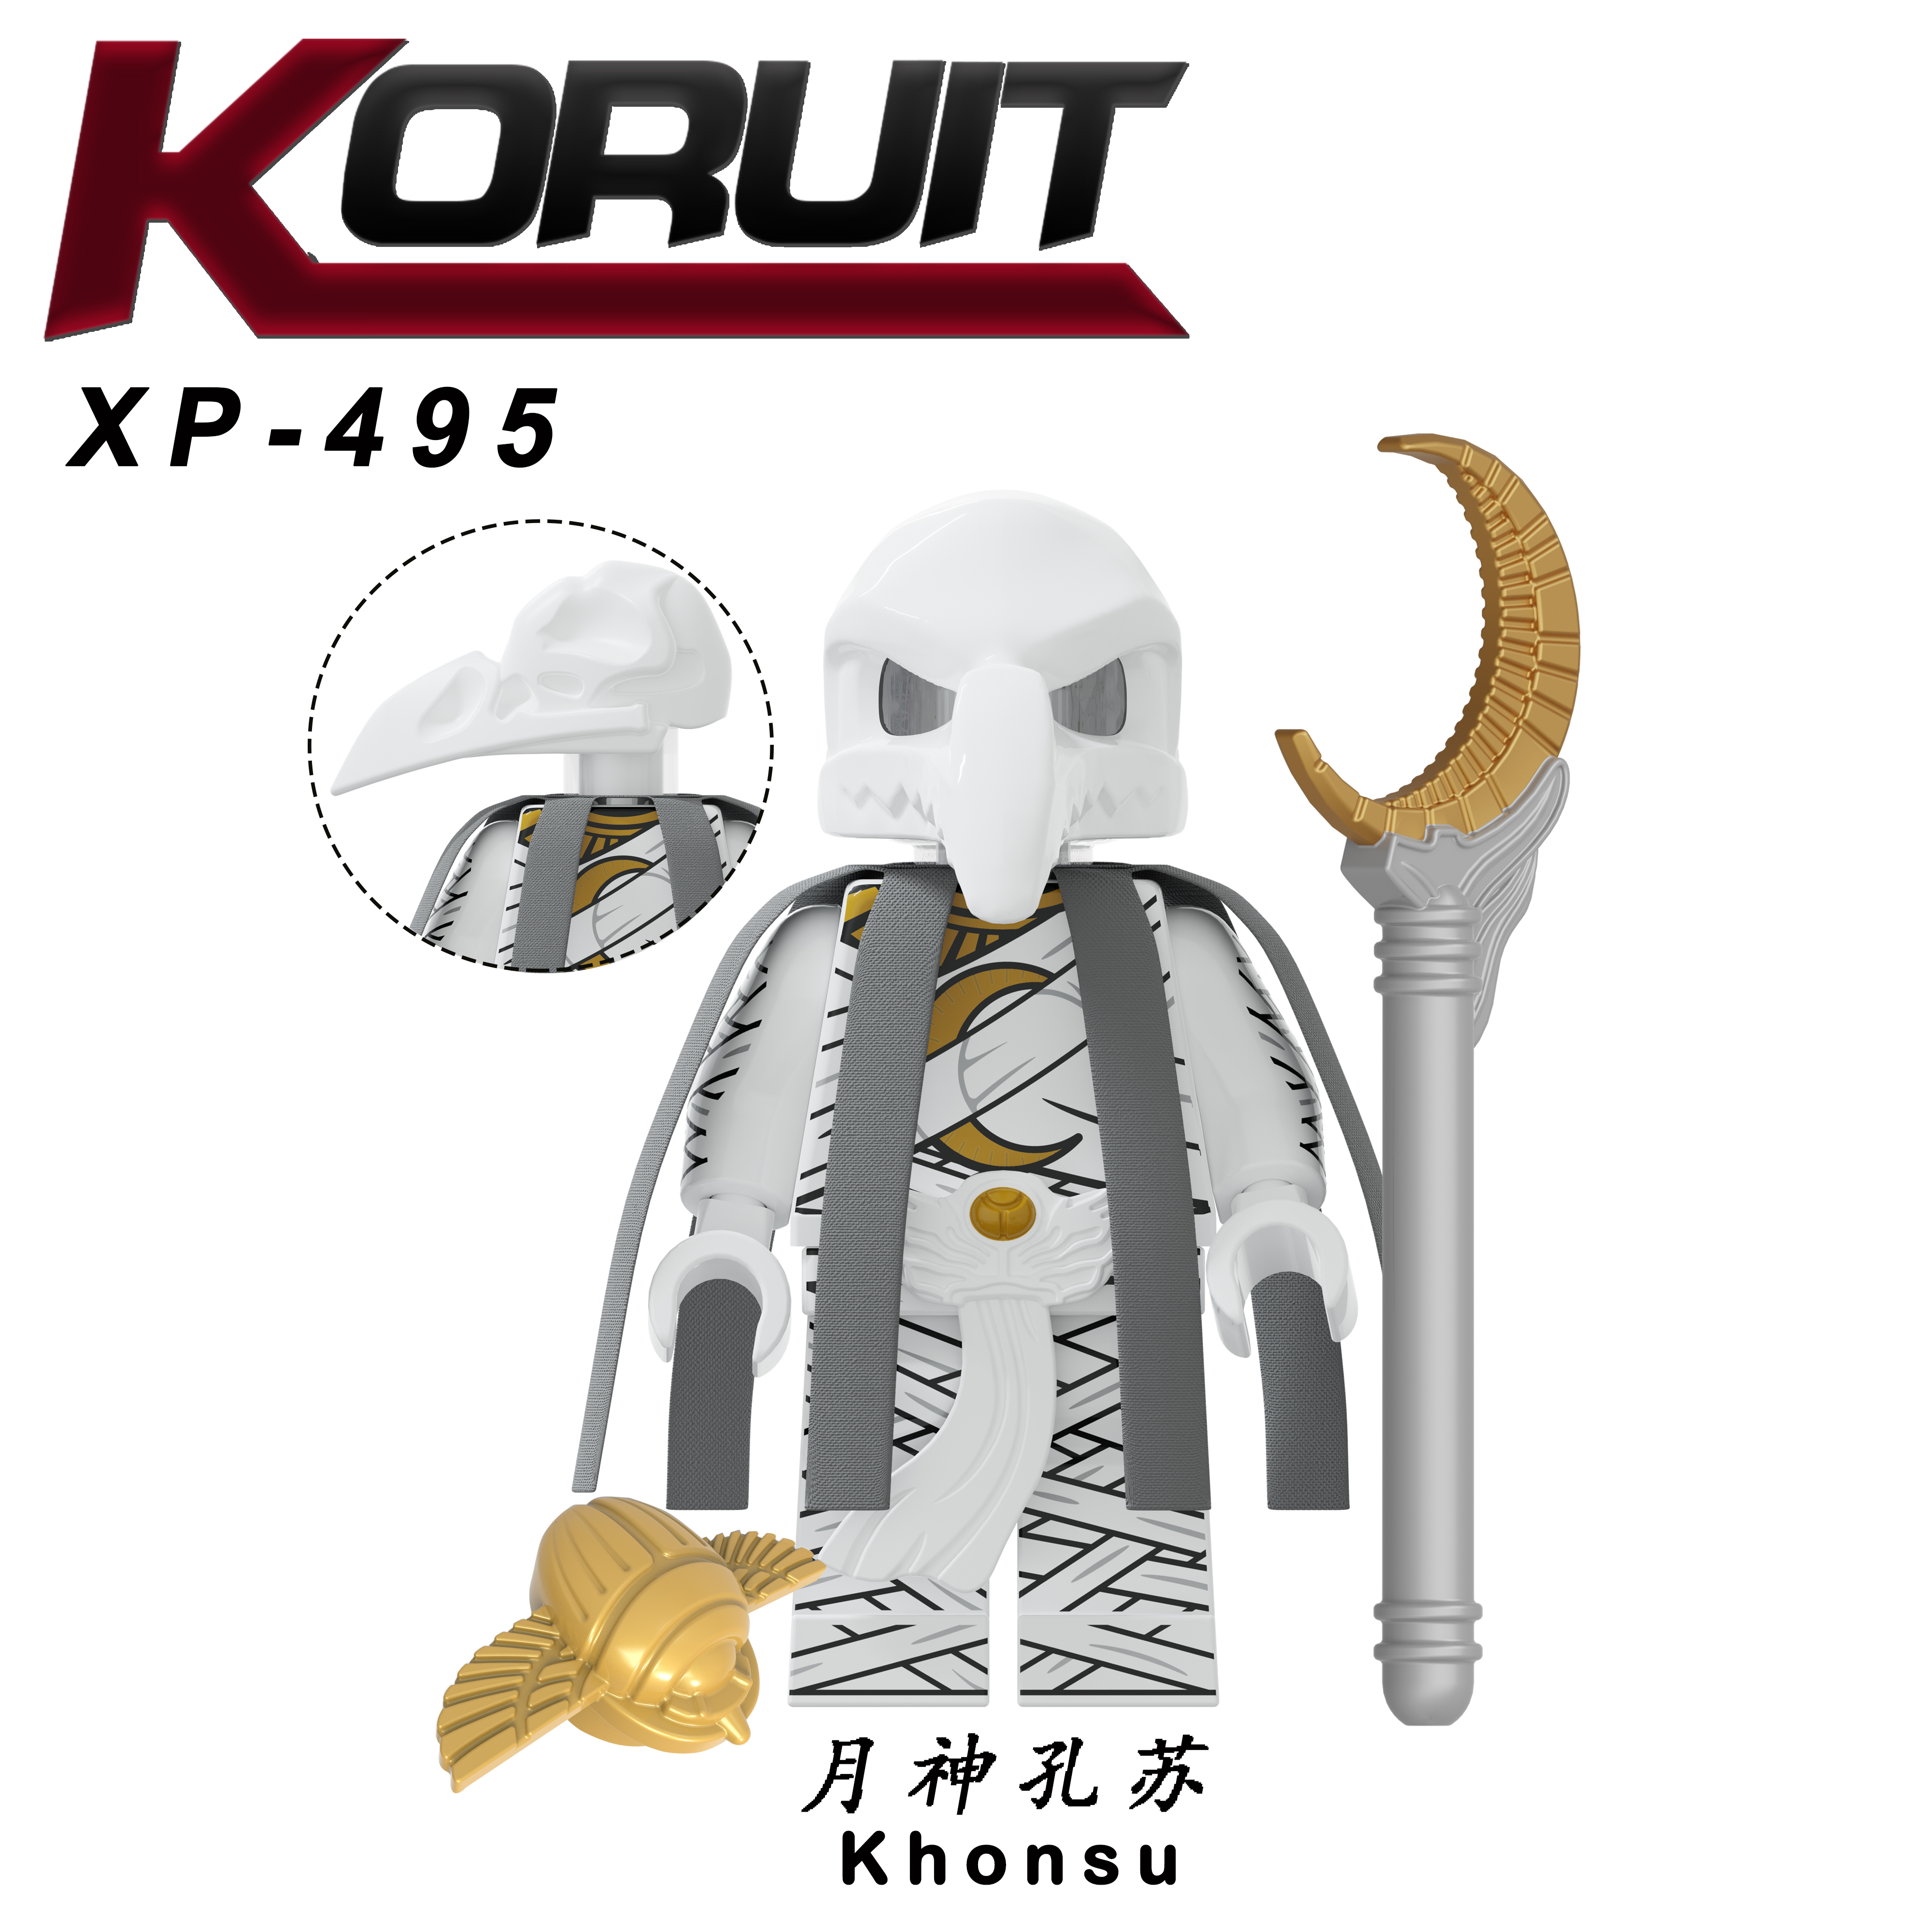 KT1065 XP495 XP496 XP497 Super Heroes Moon Knight Mr Knight Khonsu Building Blocks Action Figures Educational Toys For Kids Gifts